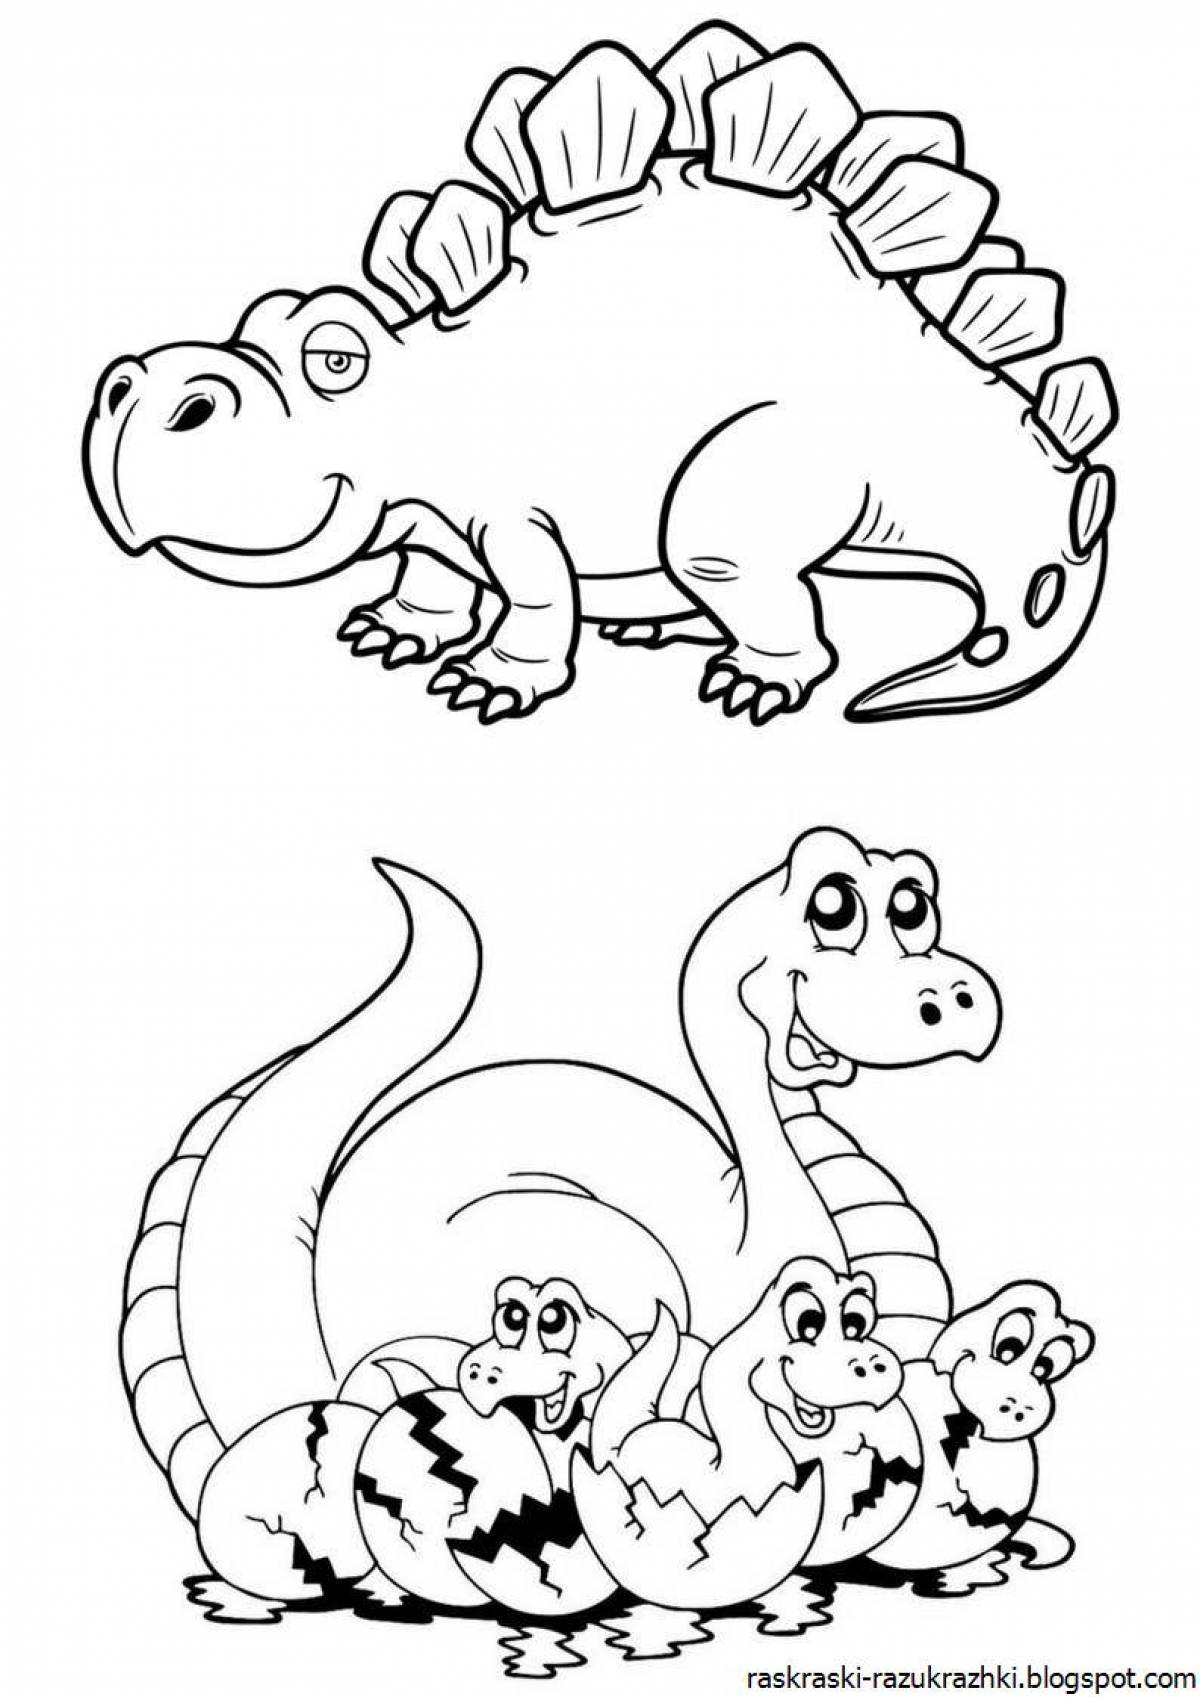 Colorful vibrant dinosaur coloring page for 4-5 year olds